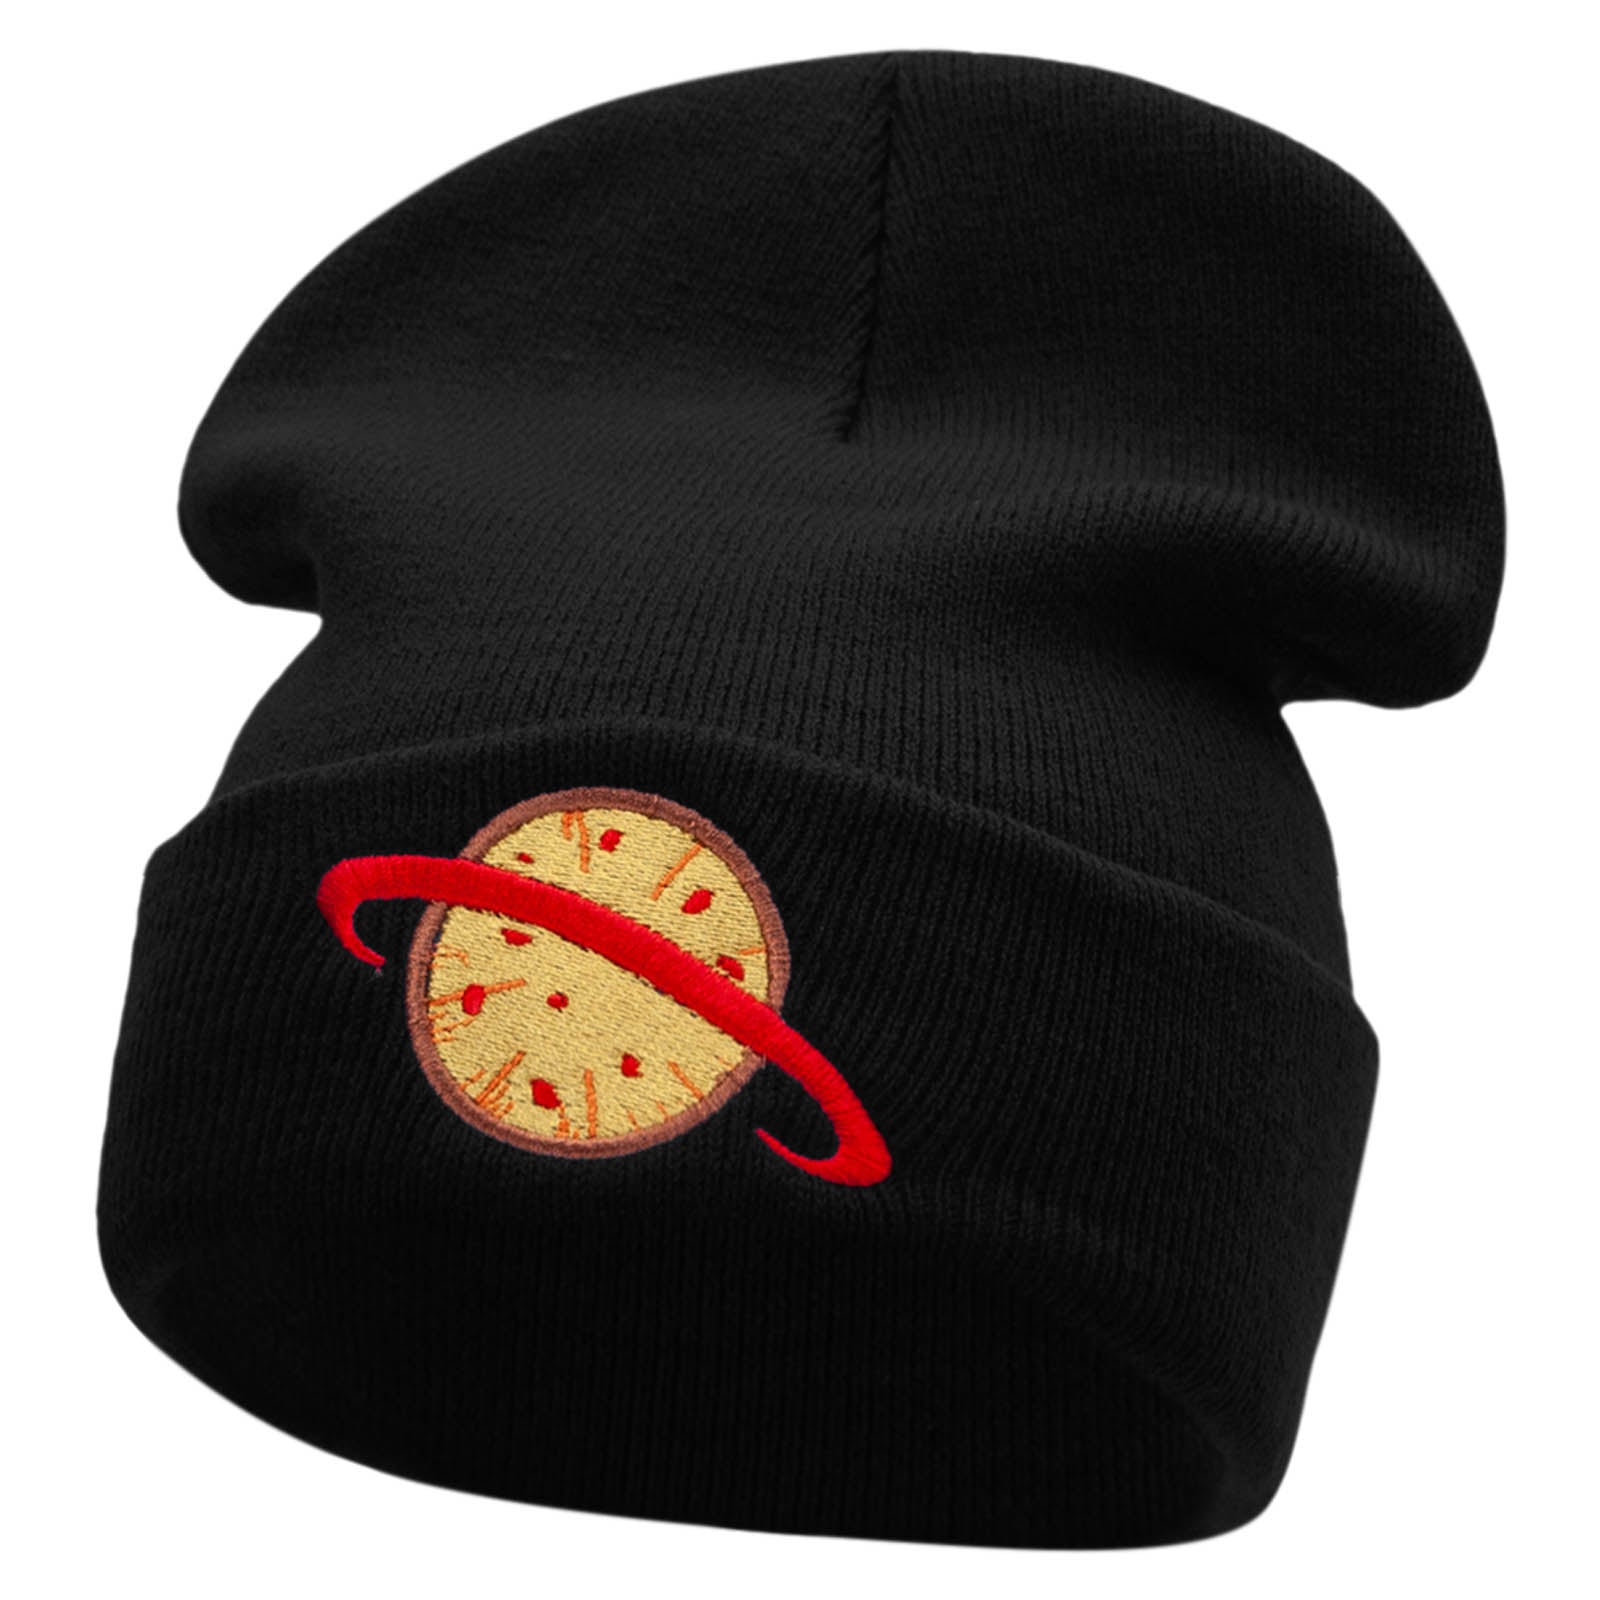 Planet Pizza Embroidered 12 Inch Long Knitted Beanie - Black OSFM